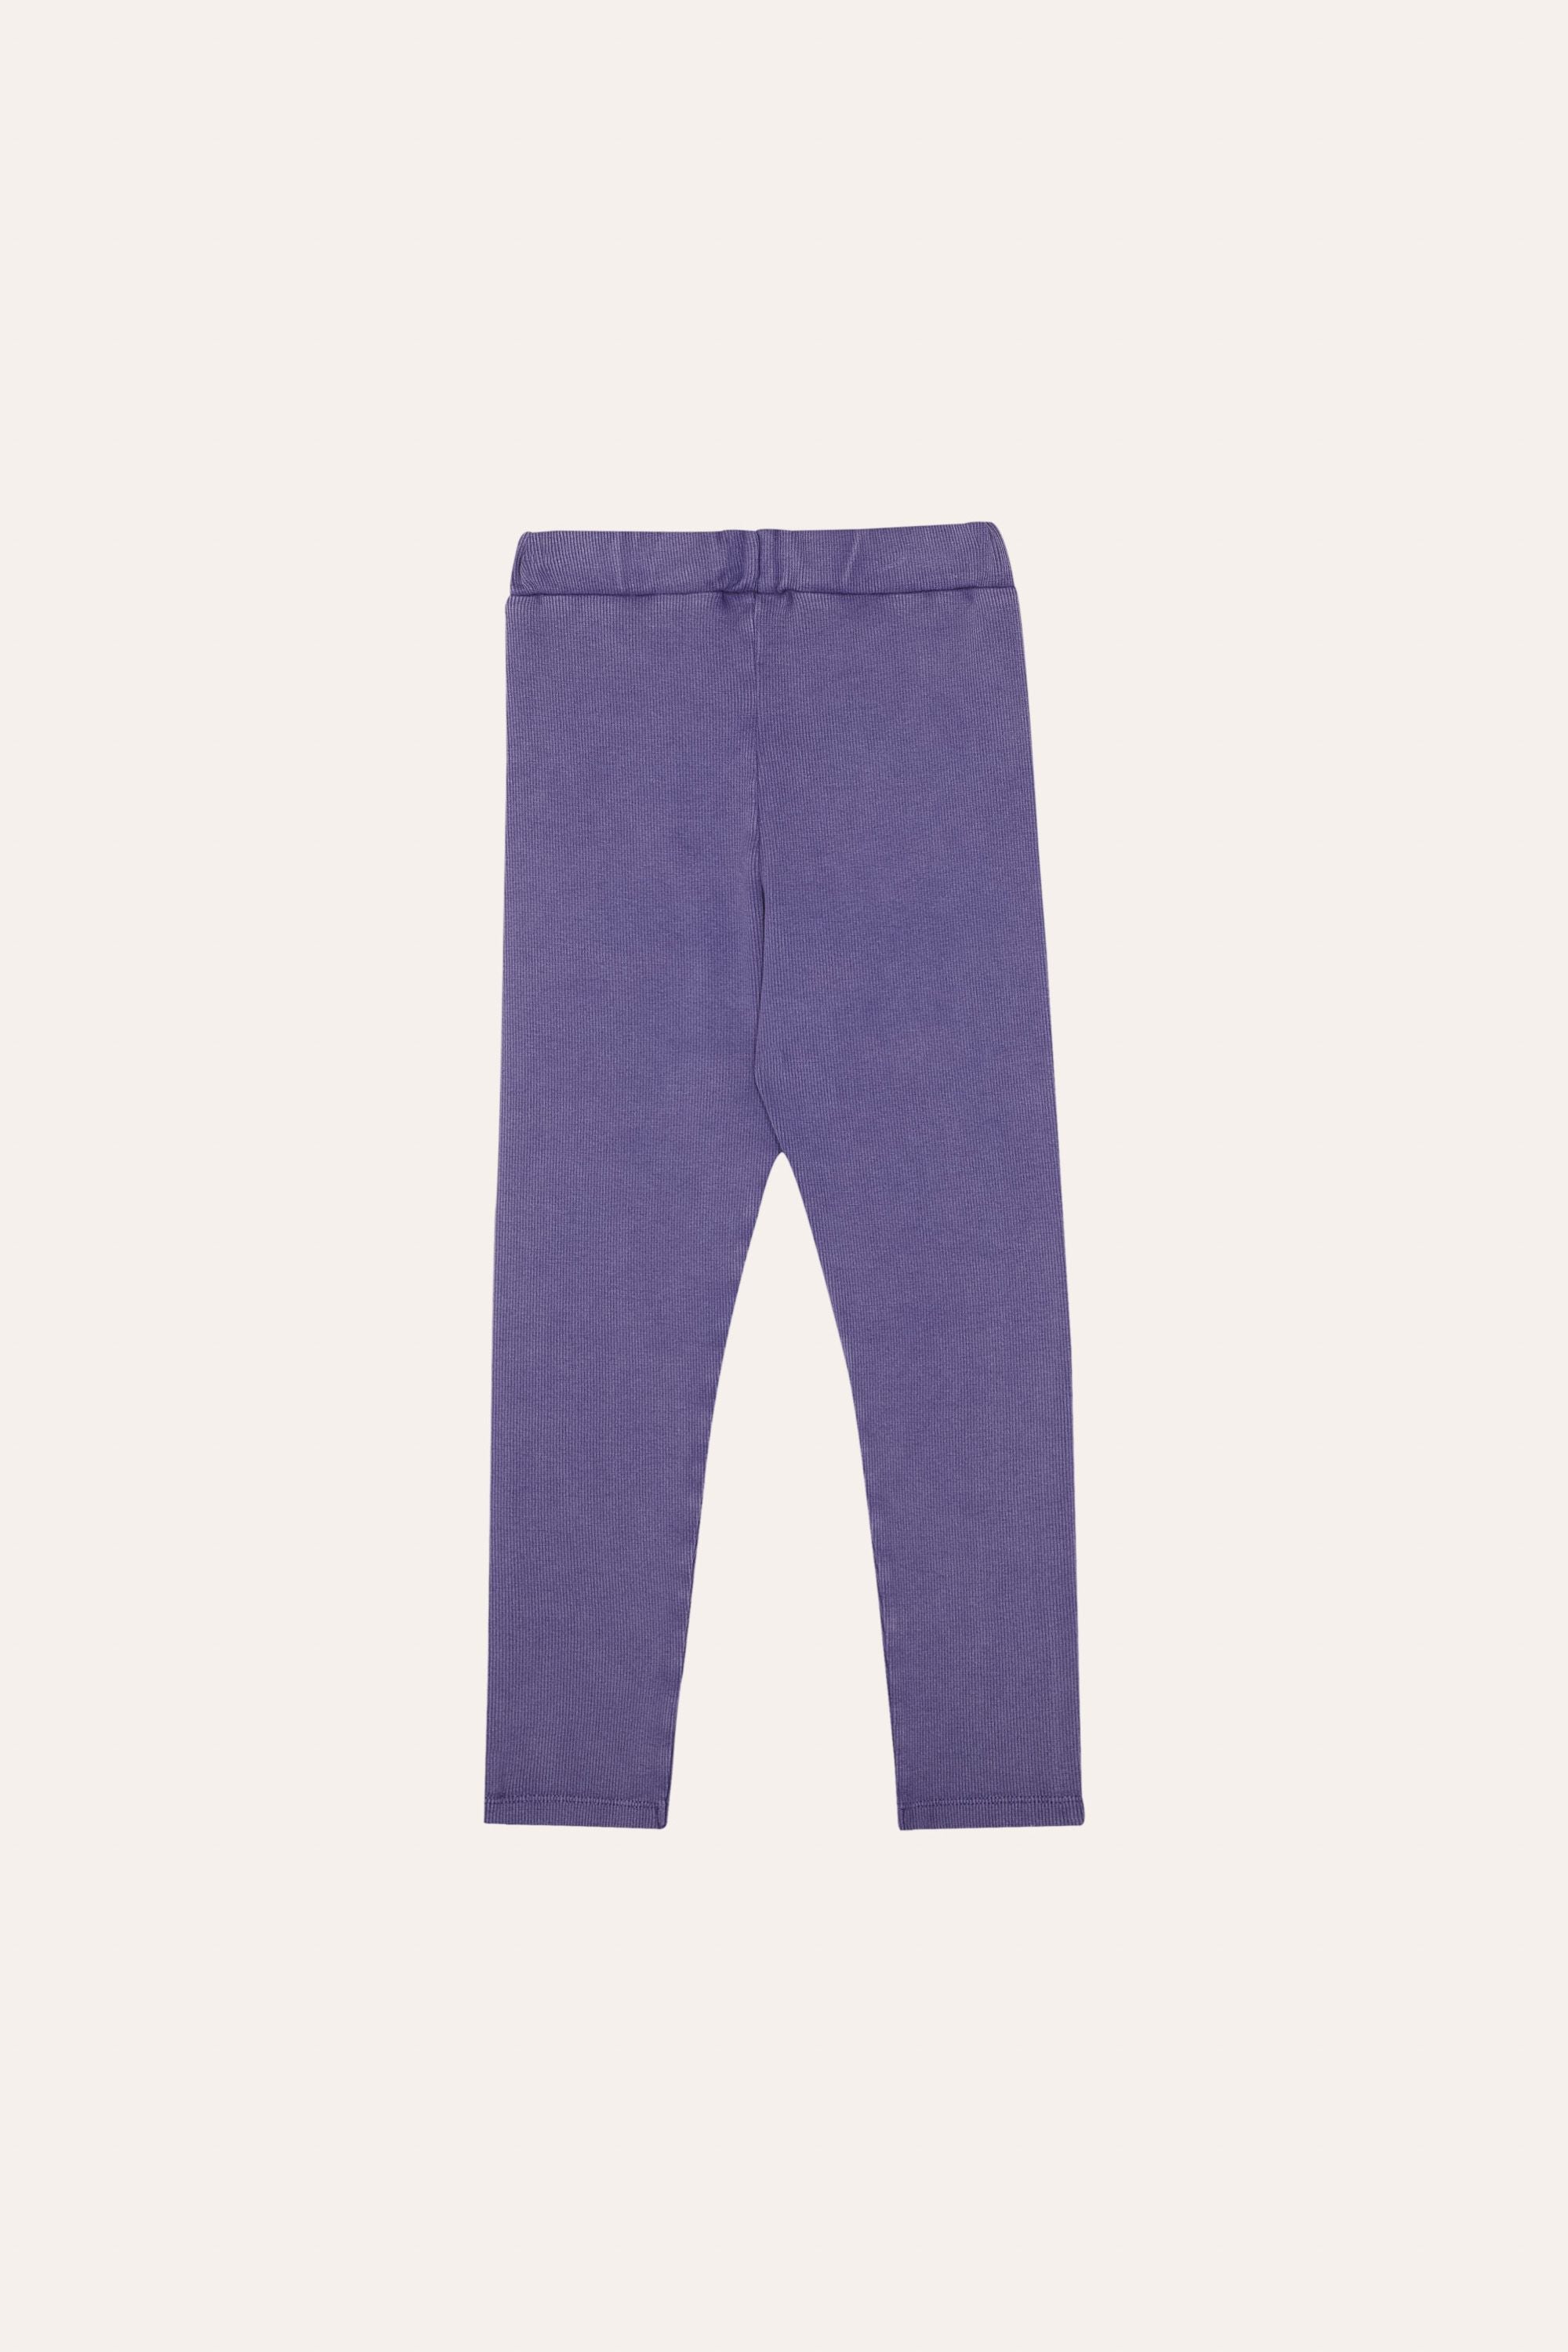 The Campamento - Blue washed kids leggings